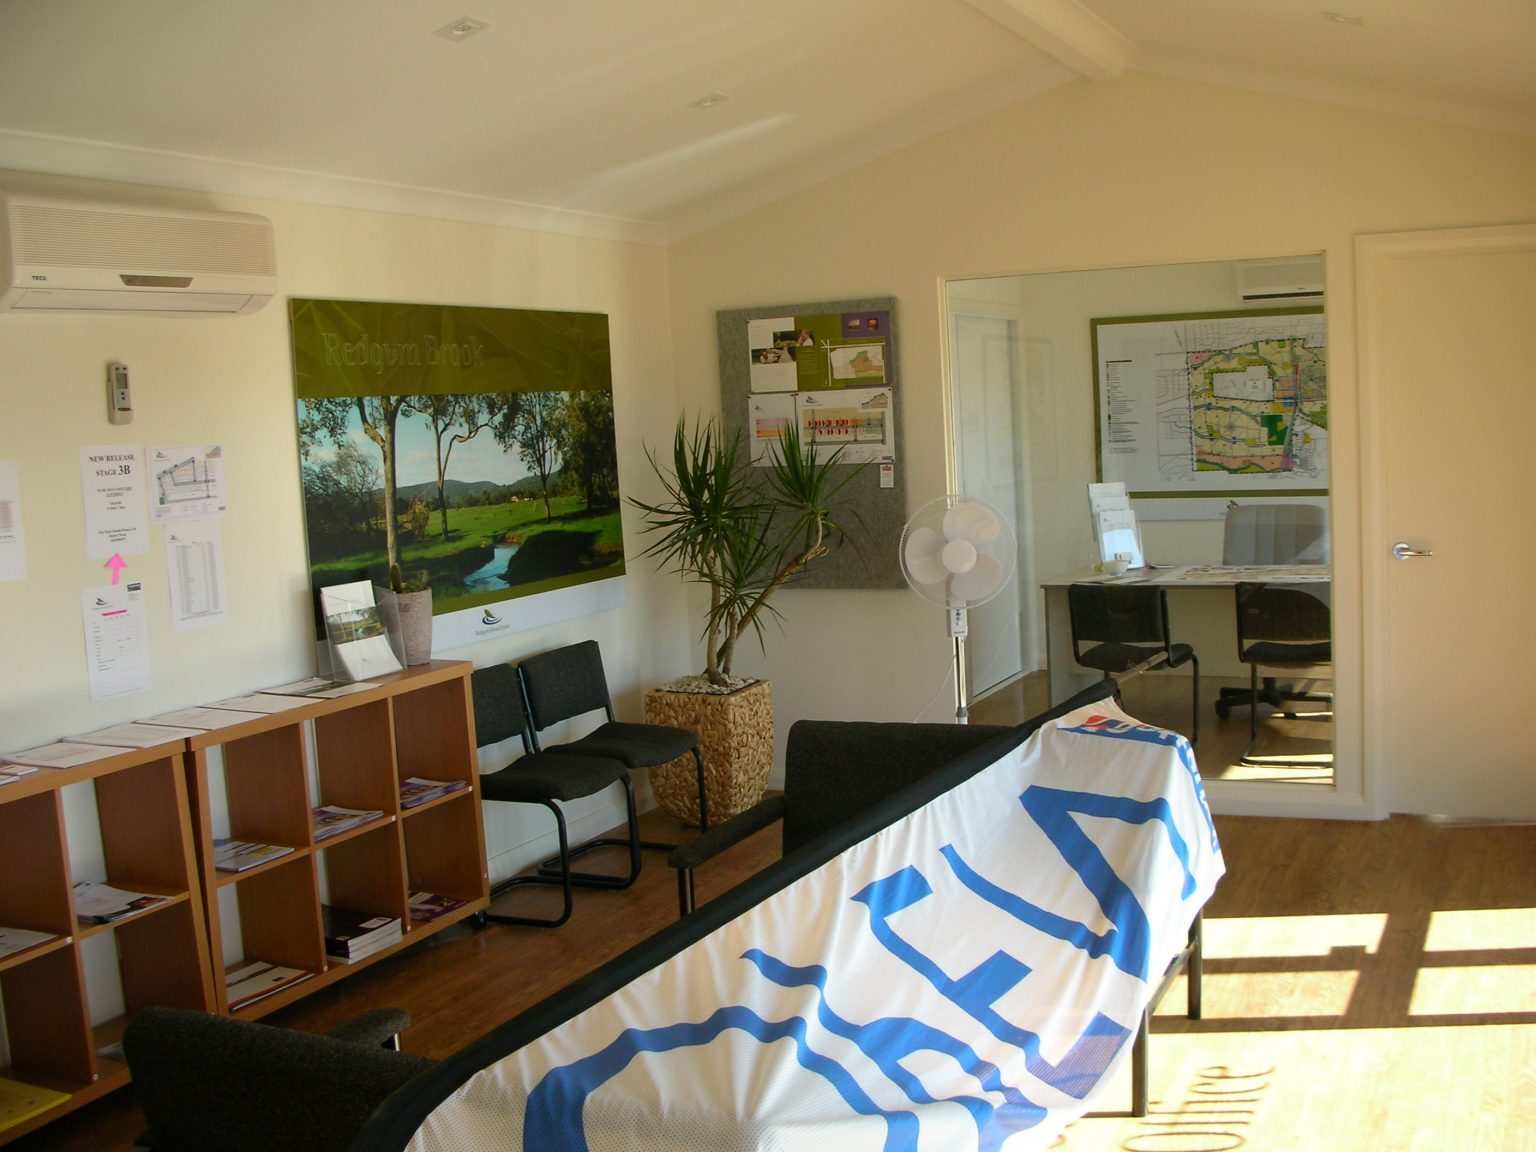 Interior of Redgum Brook Estate sales office with maps, promotional banners, and office furniture.